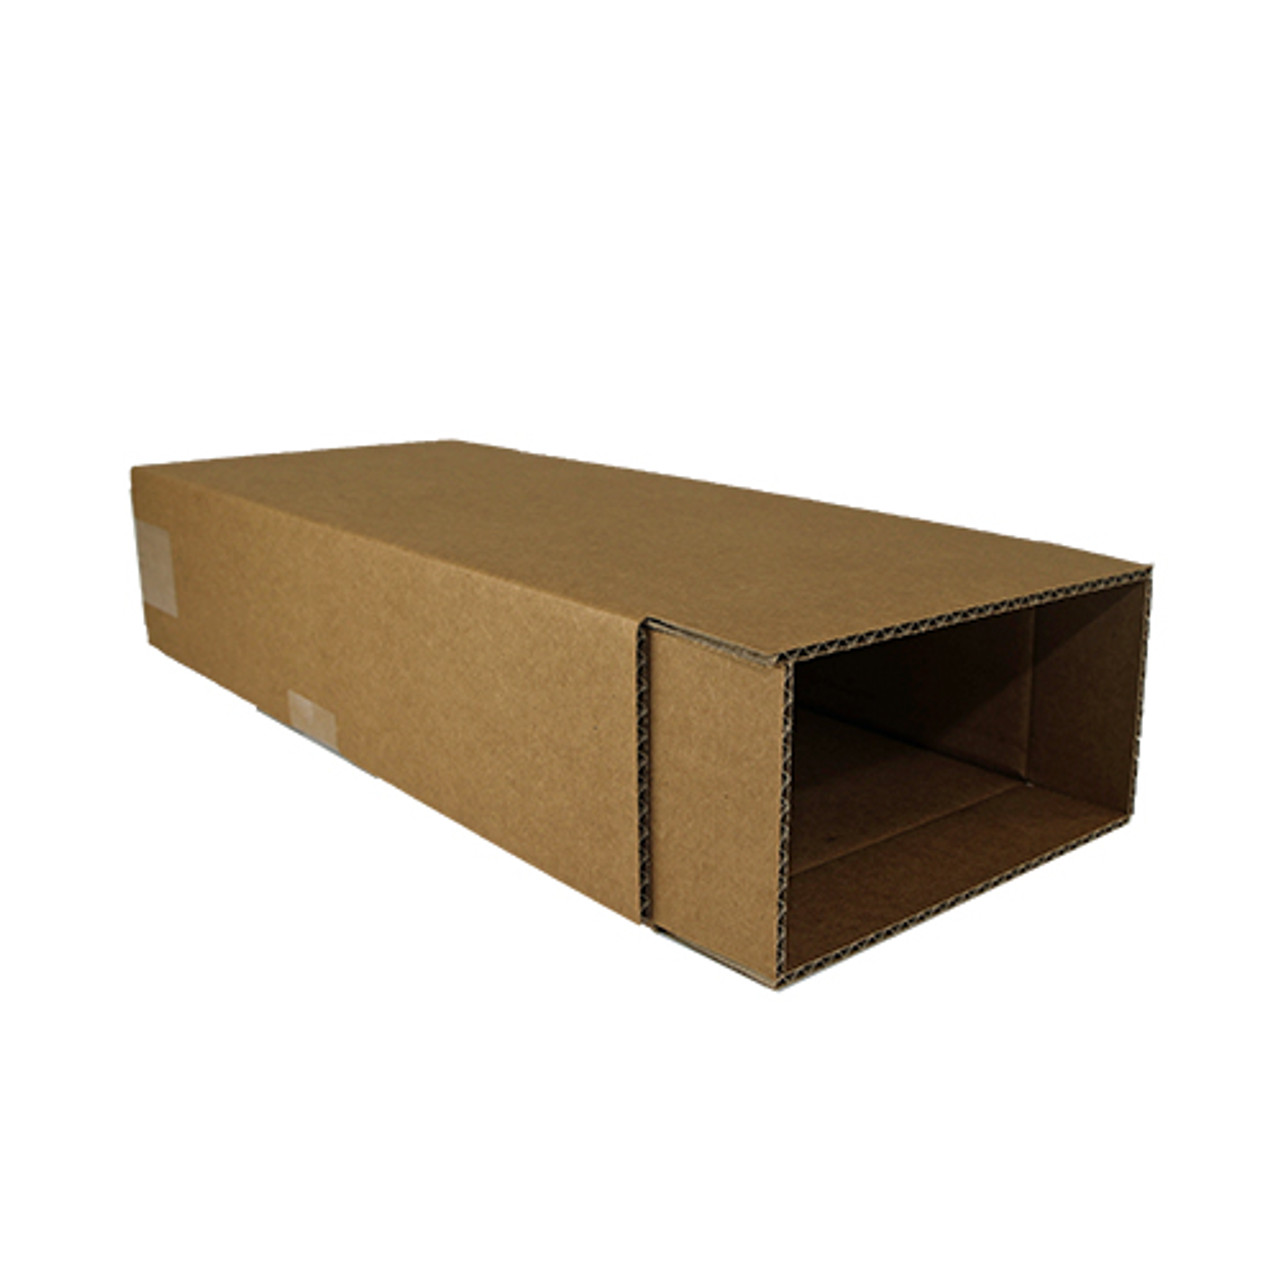 Master Cartons Corrugated Boxes - Piedmont National Corporation